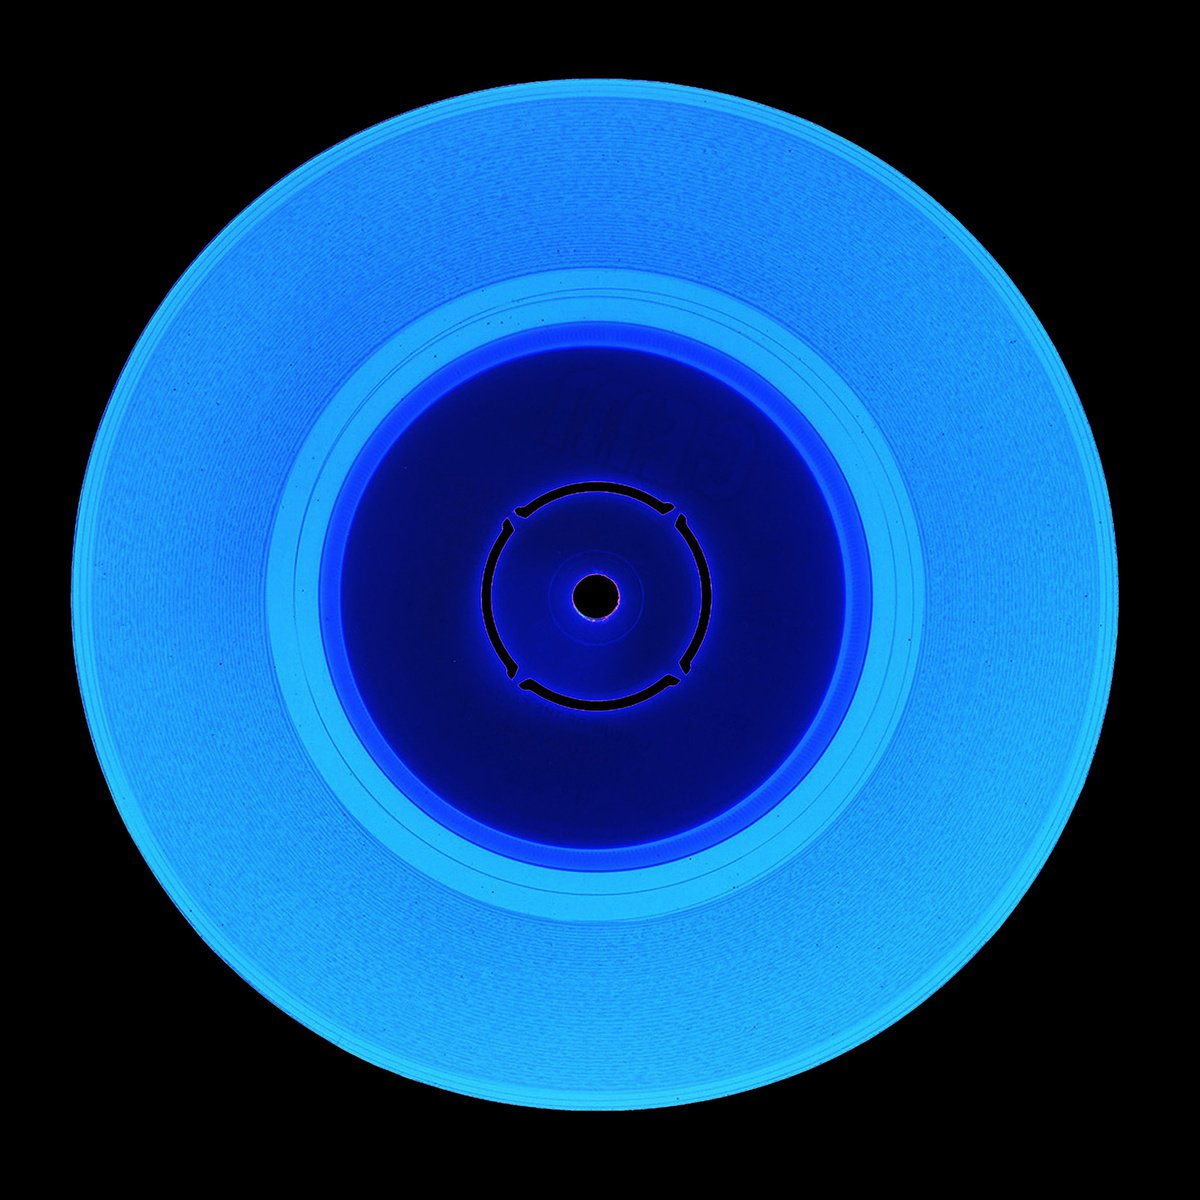 Heidler & Heeps Vinyl Collection ’Double B Side Blue’ by Richard Heeps